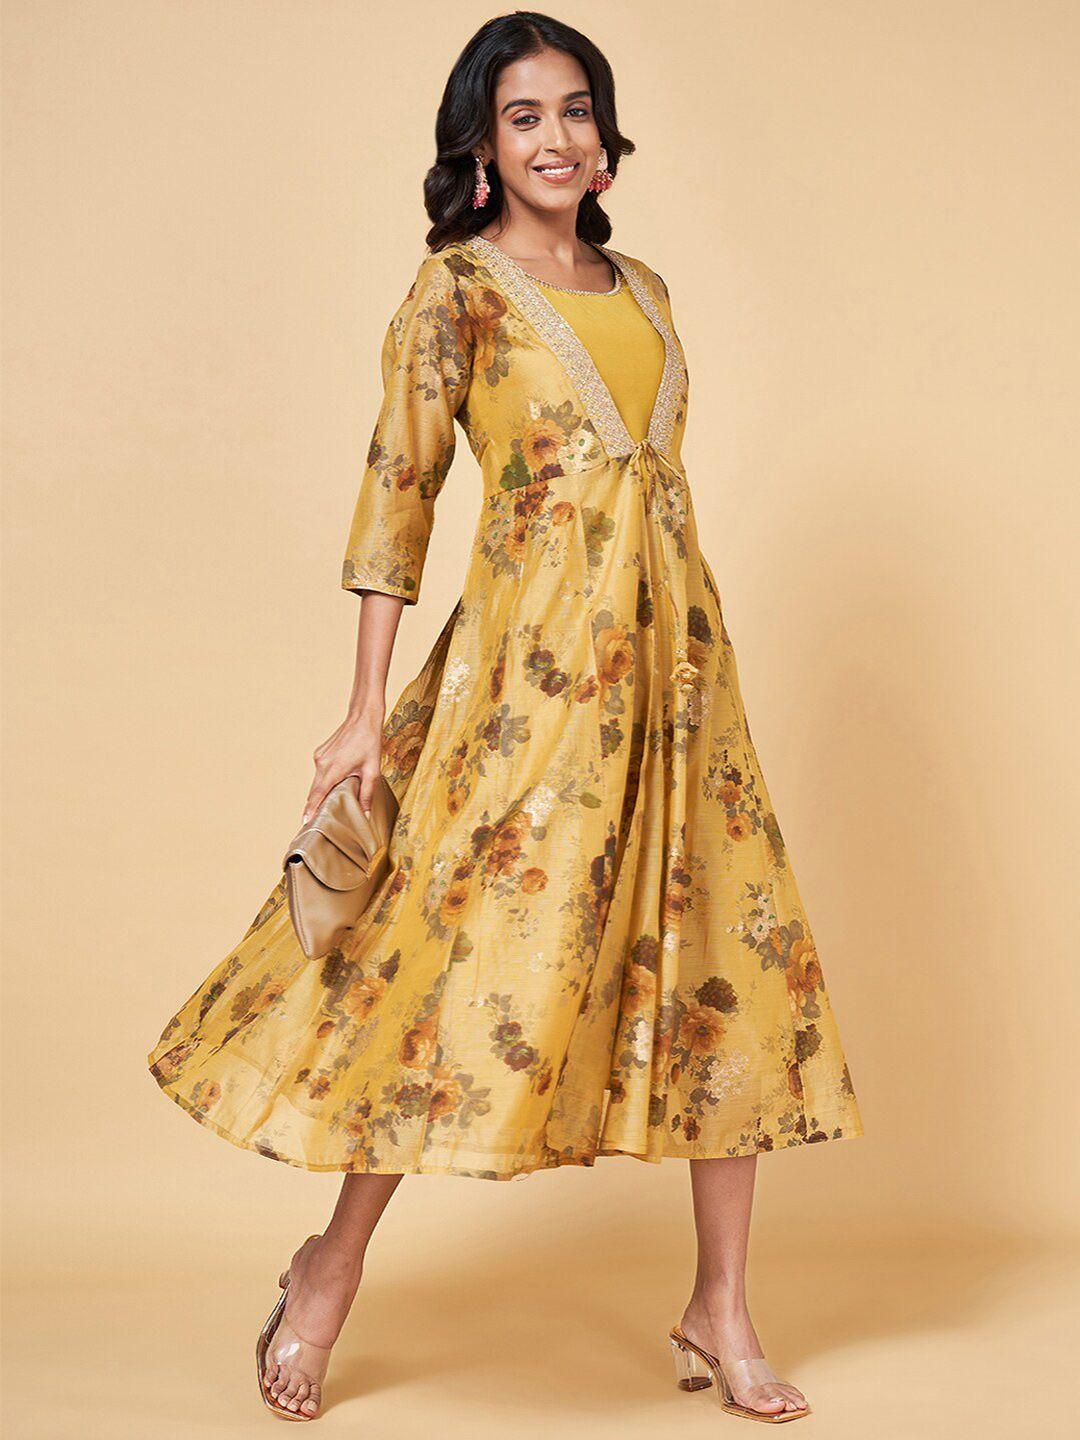 rangmanch by pantaloons floral printed embellished a-line midi ethnic dress